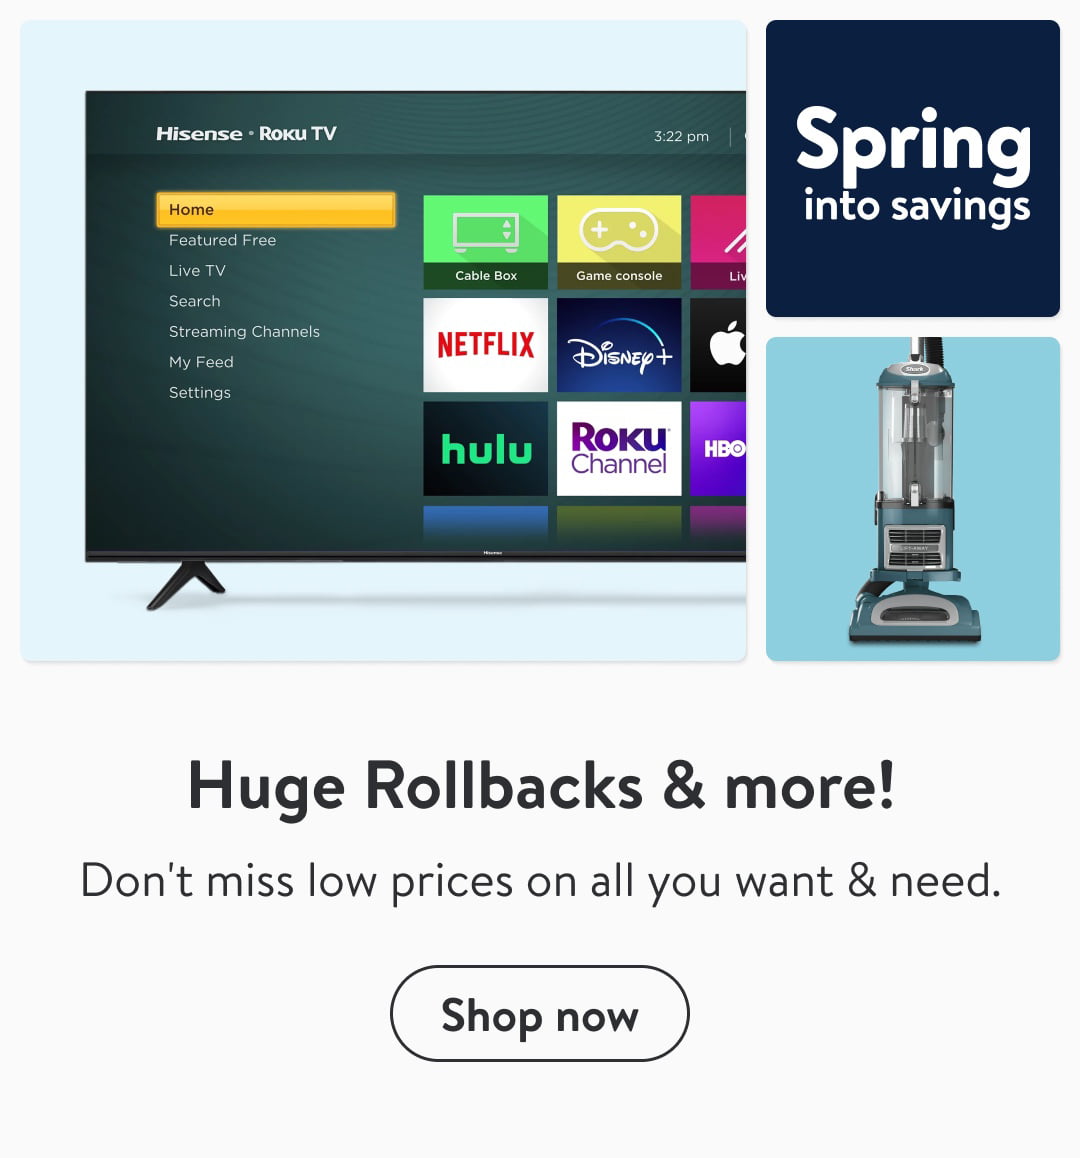 T P s Spri n g into savings NETFLIX N Roku i Huge Rollbacks more! Don't miss low prices on all you want need. 